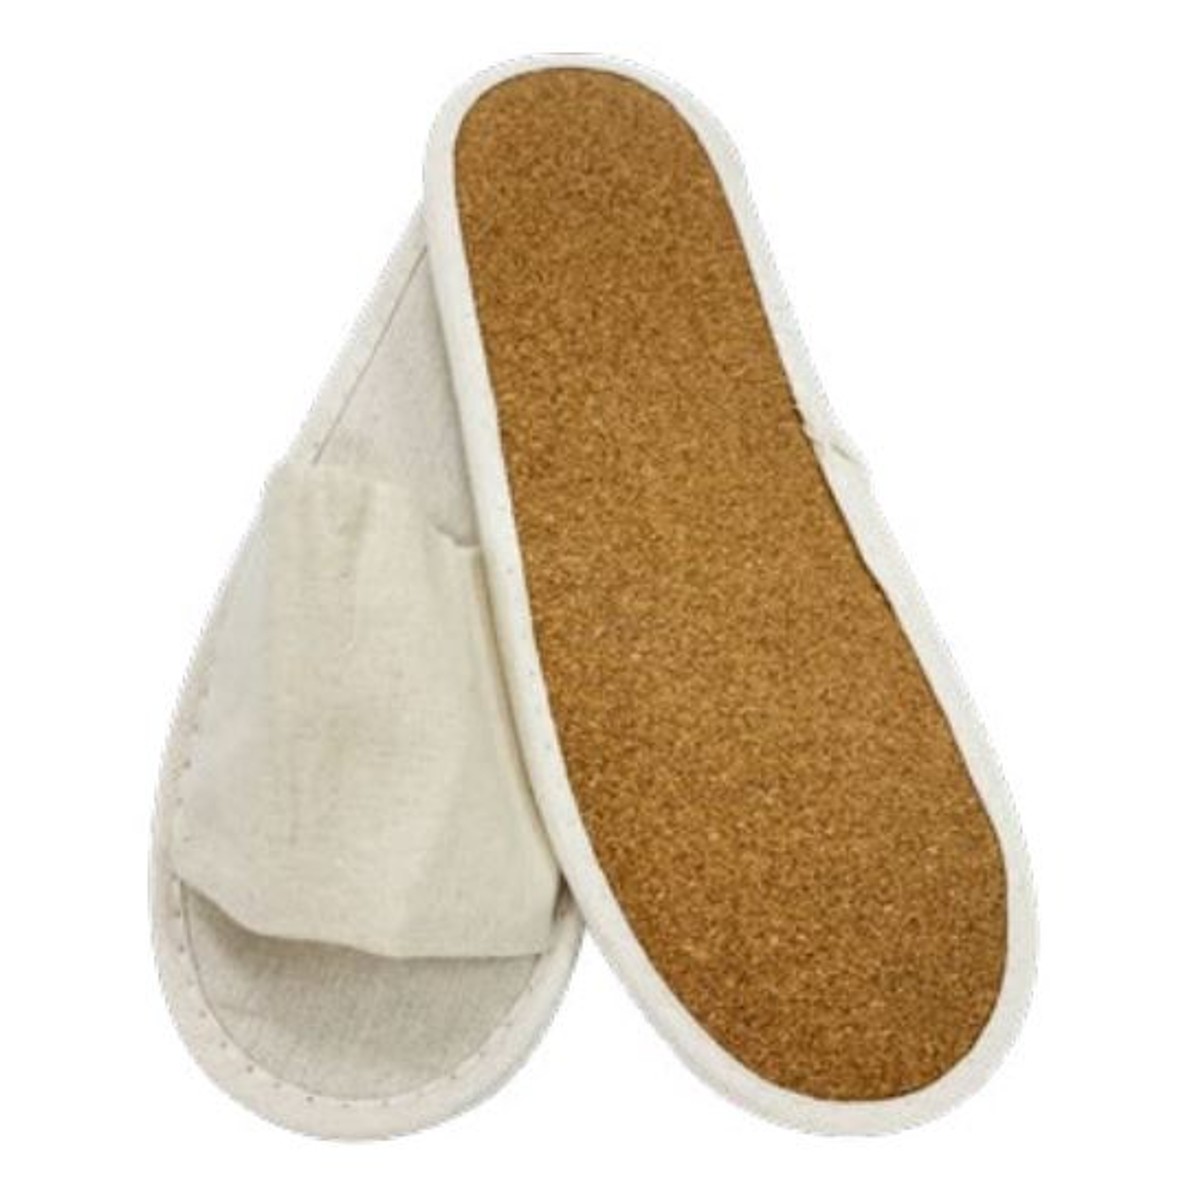 Bio Slippers Open Toe Wrapper - available at RapidClean